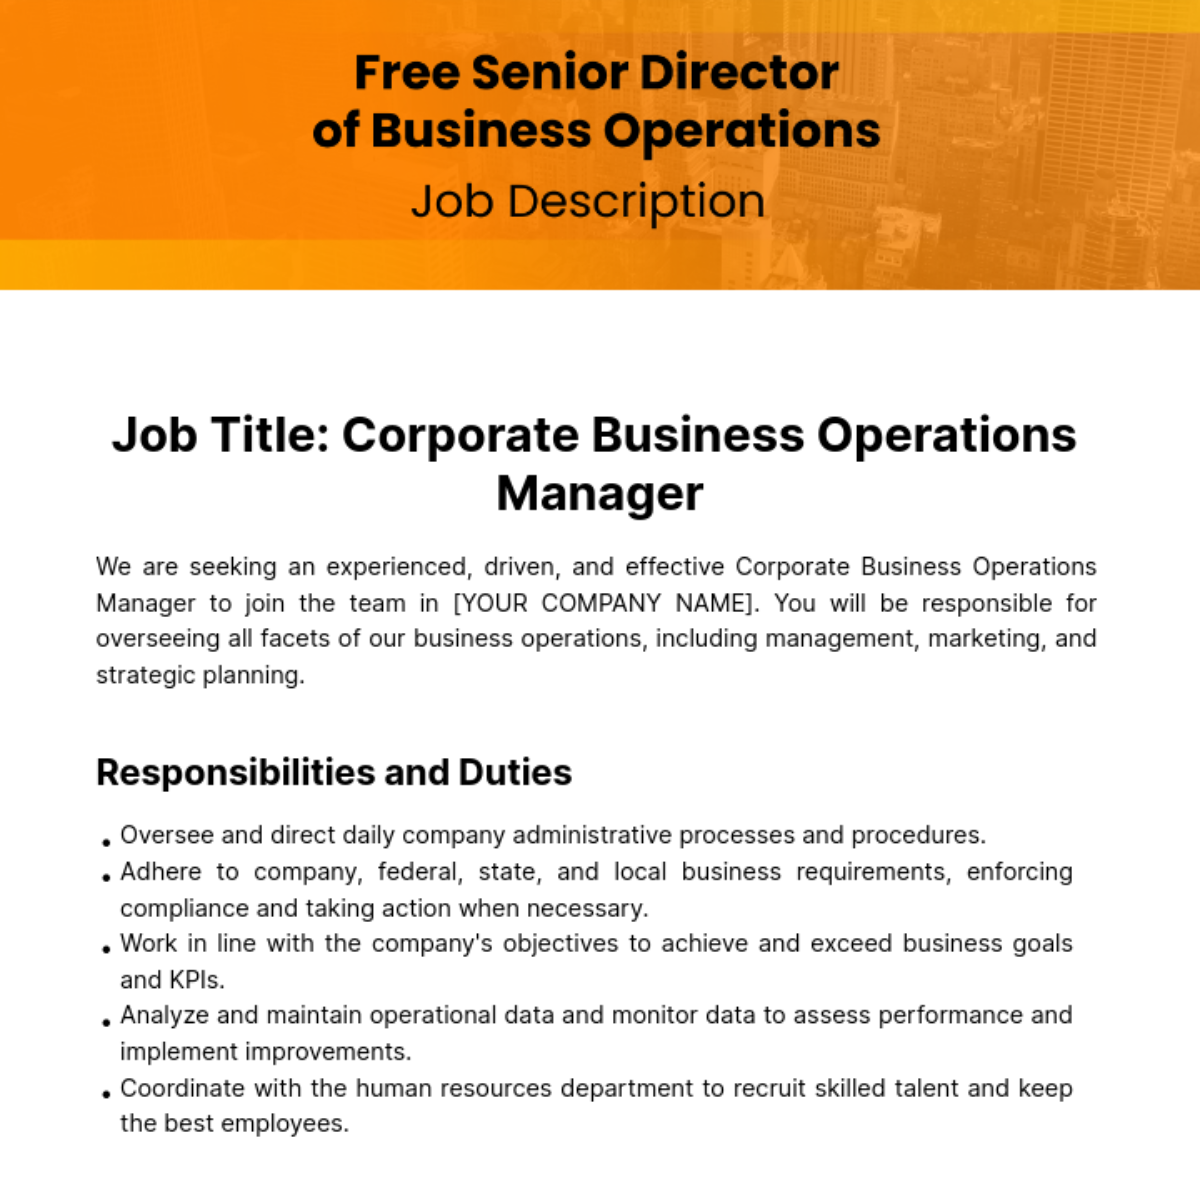 Corporate Business Operations Manager Job Description Template